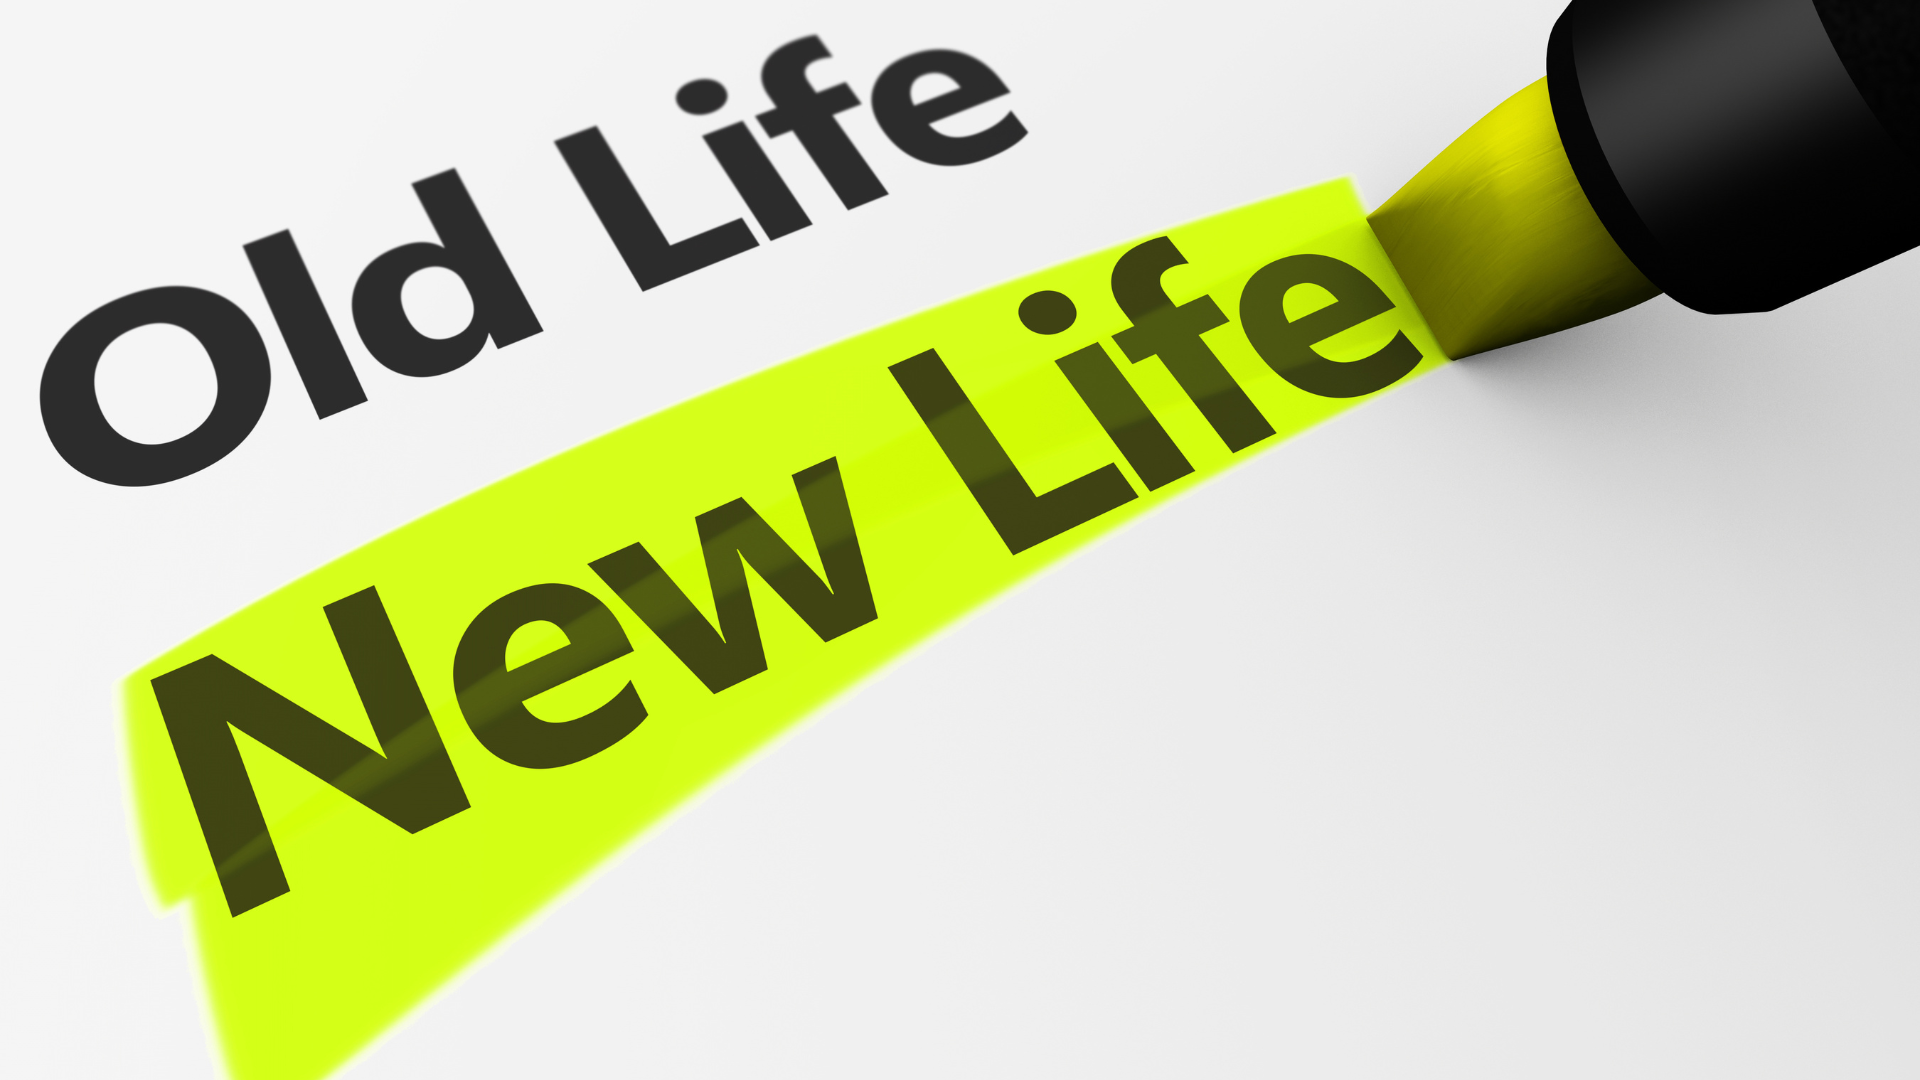 The words 'New Life' are highlighted